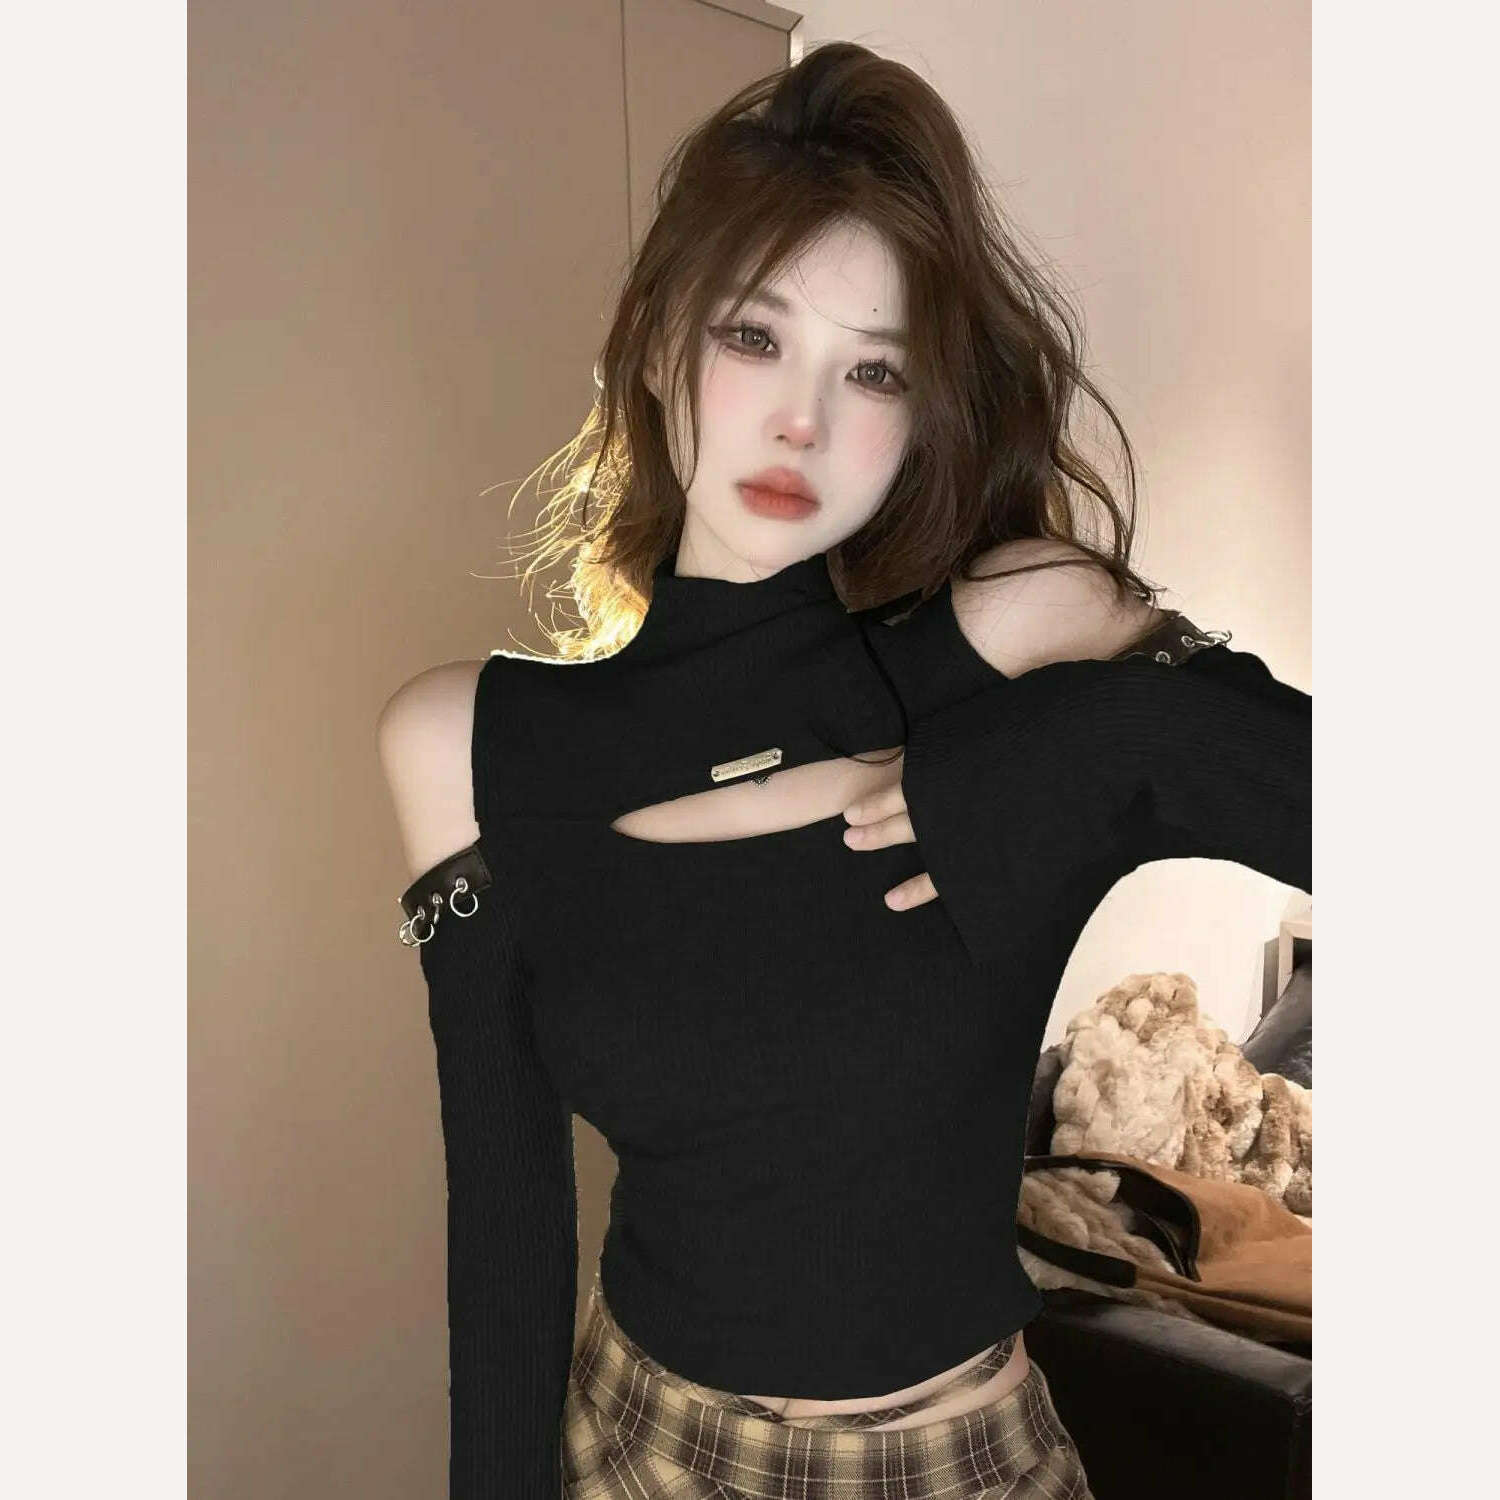 KIMLUD, Long Sleeve T-shirts Women Hollow Out Spliced Slim-fit Sexy Autumn Turtleneck All-match Off Shoulder Hot Girls Streetwear Soft, black / S, KIMLUD Womens Clothes